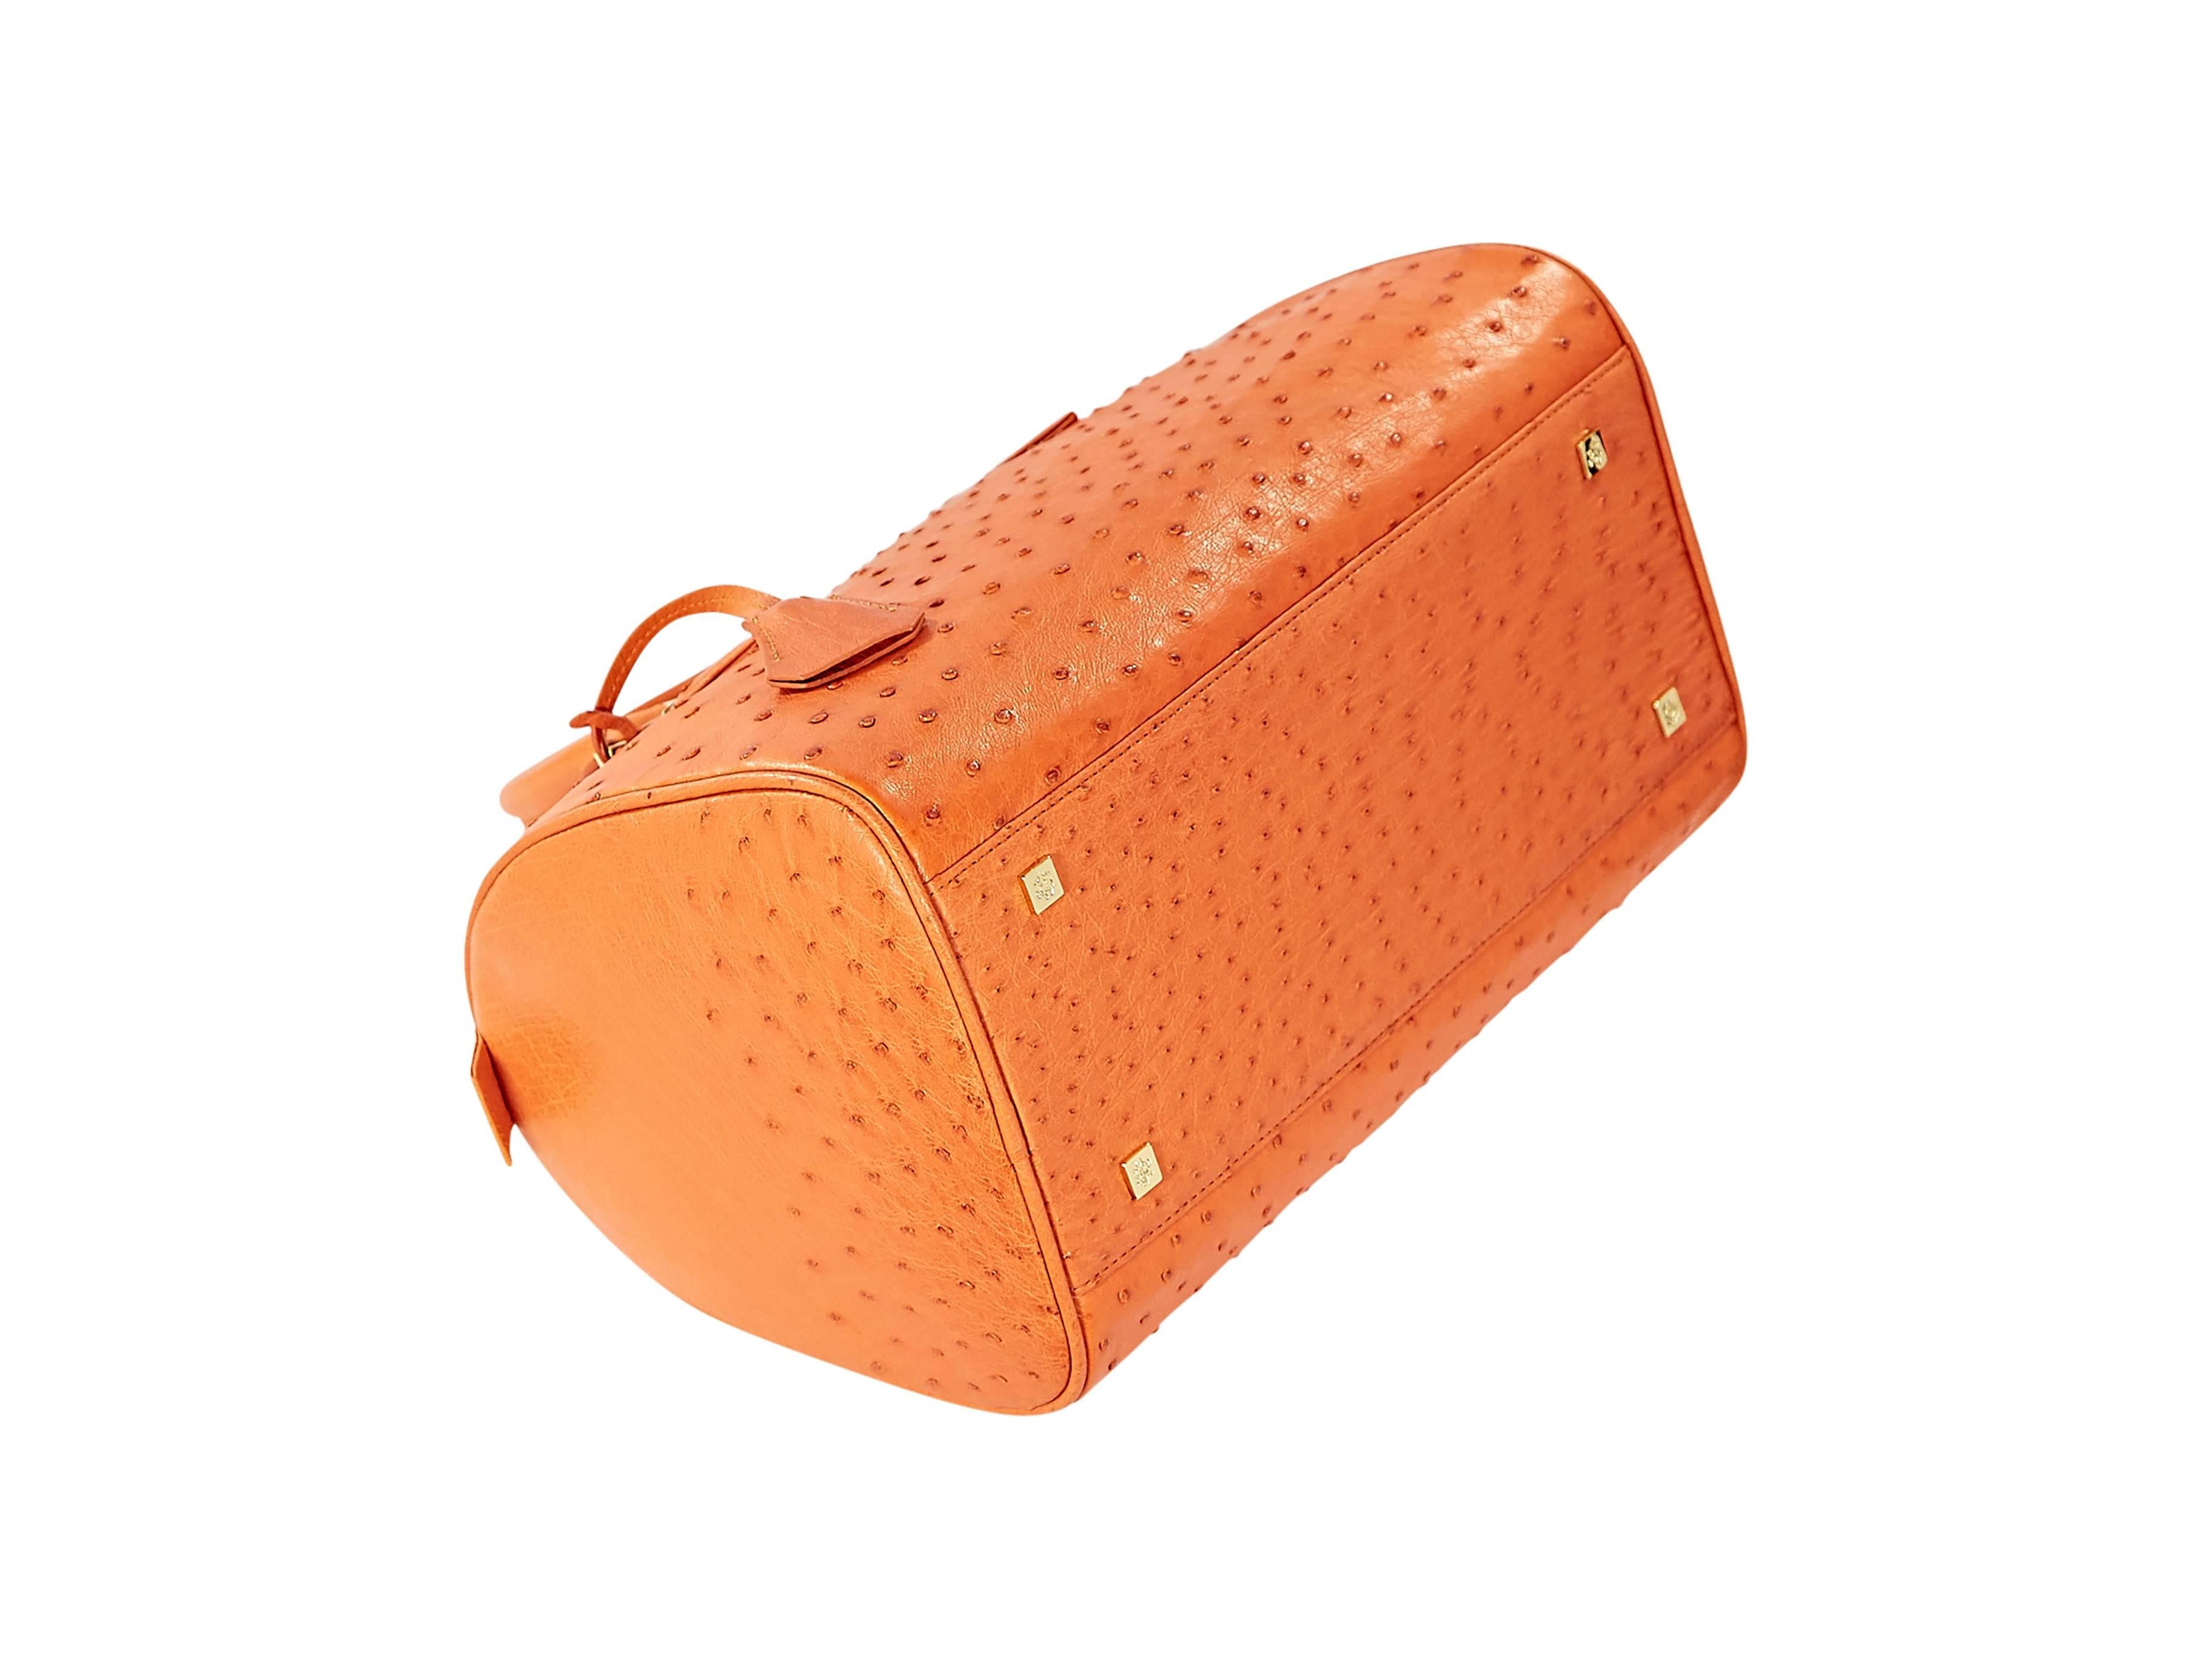 Orange ostrich barrel bag by Brook Brothers.  Dual carry handles.  Top zip closure with lock and key.  Lined interior with zip-close and slide pockets.  Protective metal feet.  Goldtone hardware.  